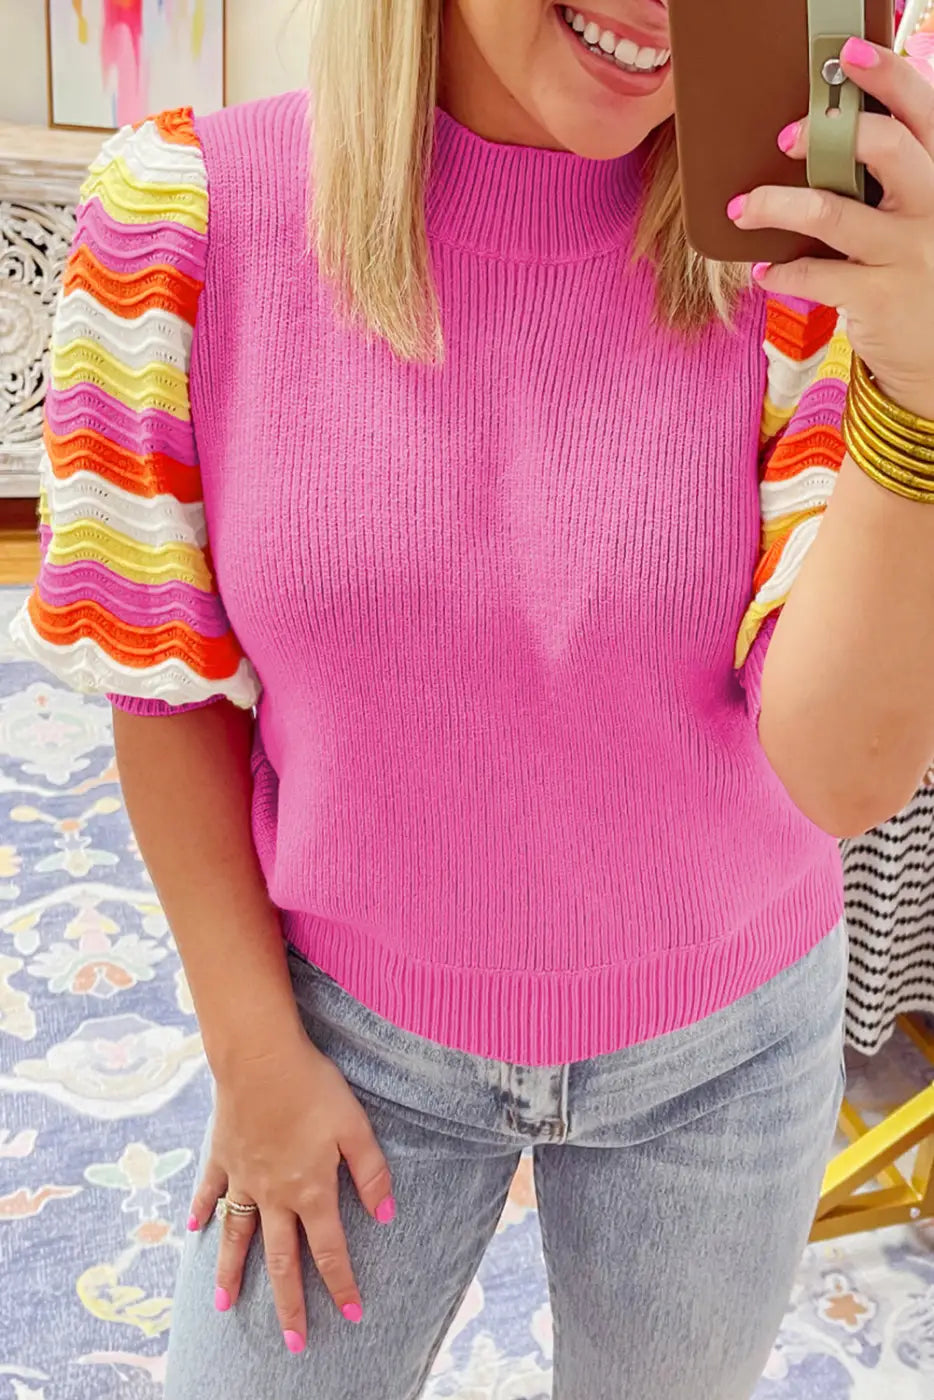 Pink ribbed knit top - s / 50% viscose + 28% polyester + 22% polyamide - short sleeve sweaters